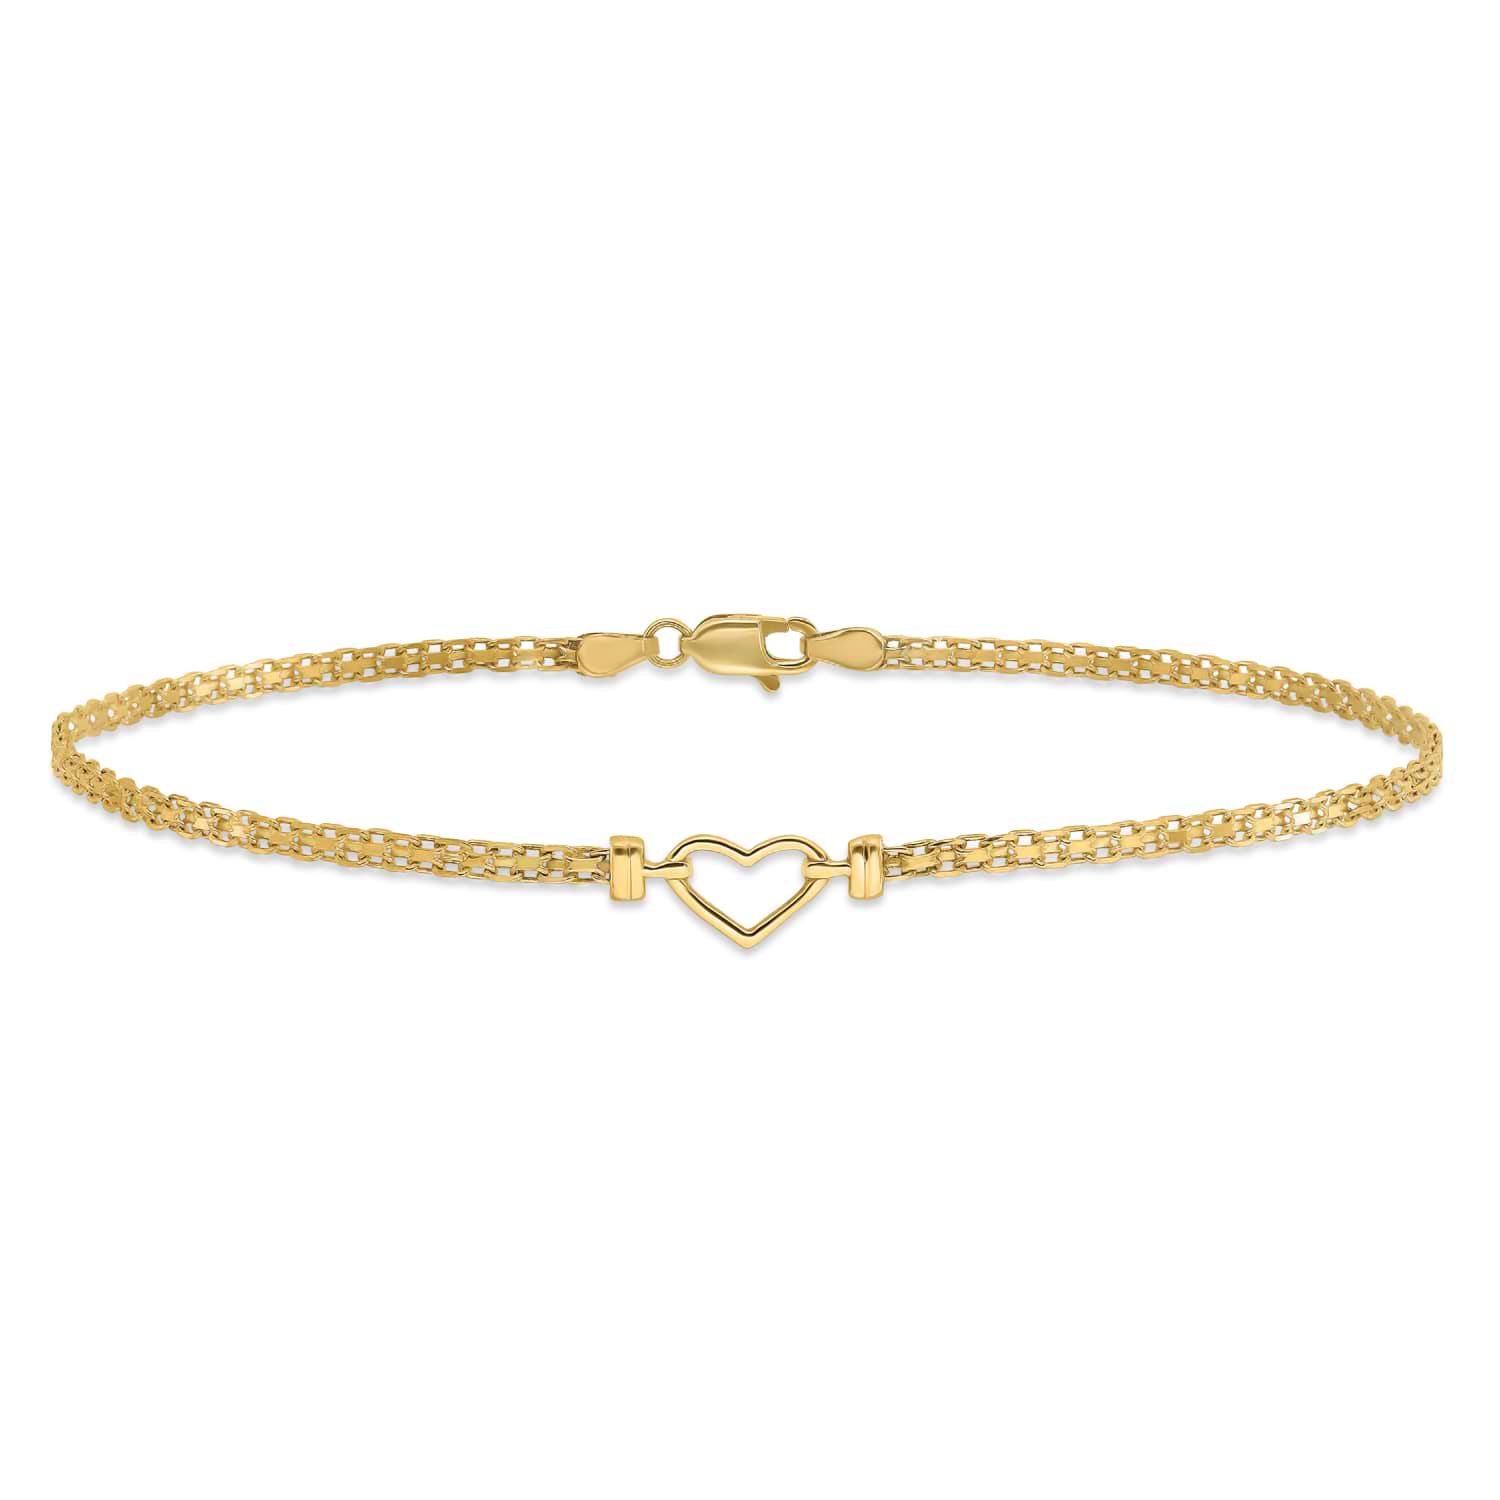 Shop 14K Yellow Gold Chain Ankle Bracelet with White Gold Diamond Leaf and  Square Charms  Shop 14k Yellow  white Gold Anklets  Gabriel  Co